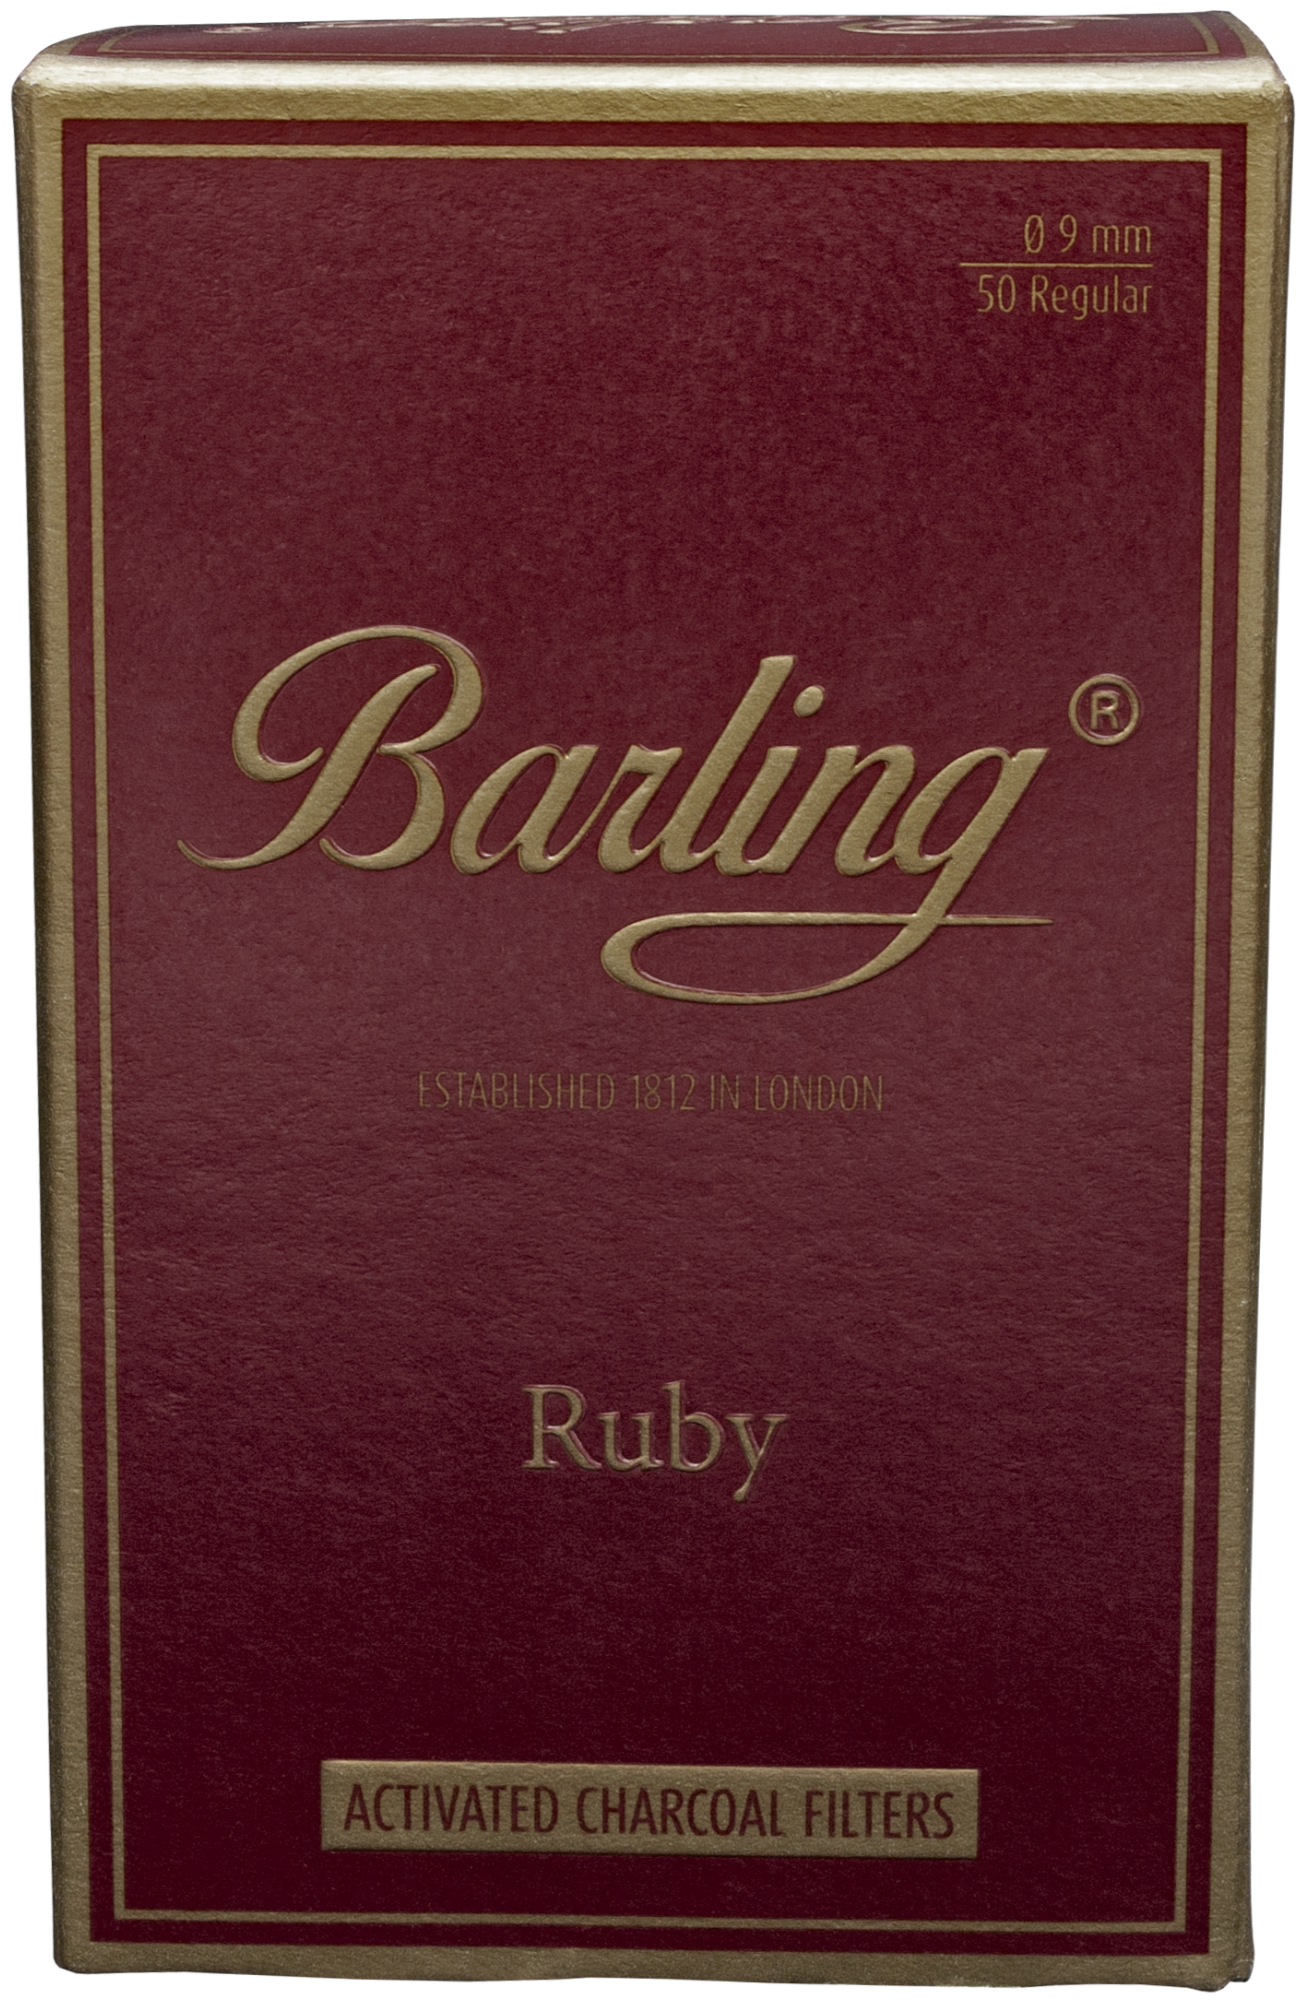 Barling Ruby 50 Activated Charcoal Filter 9mm (10x) 